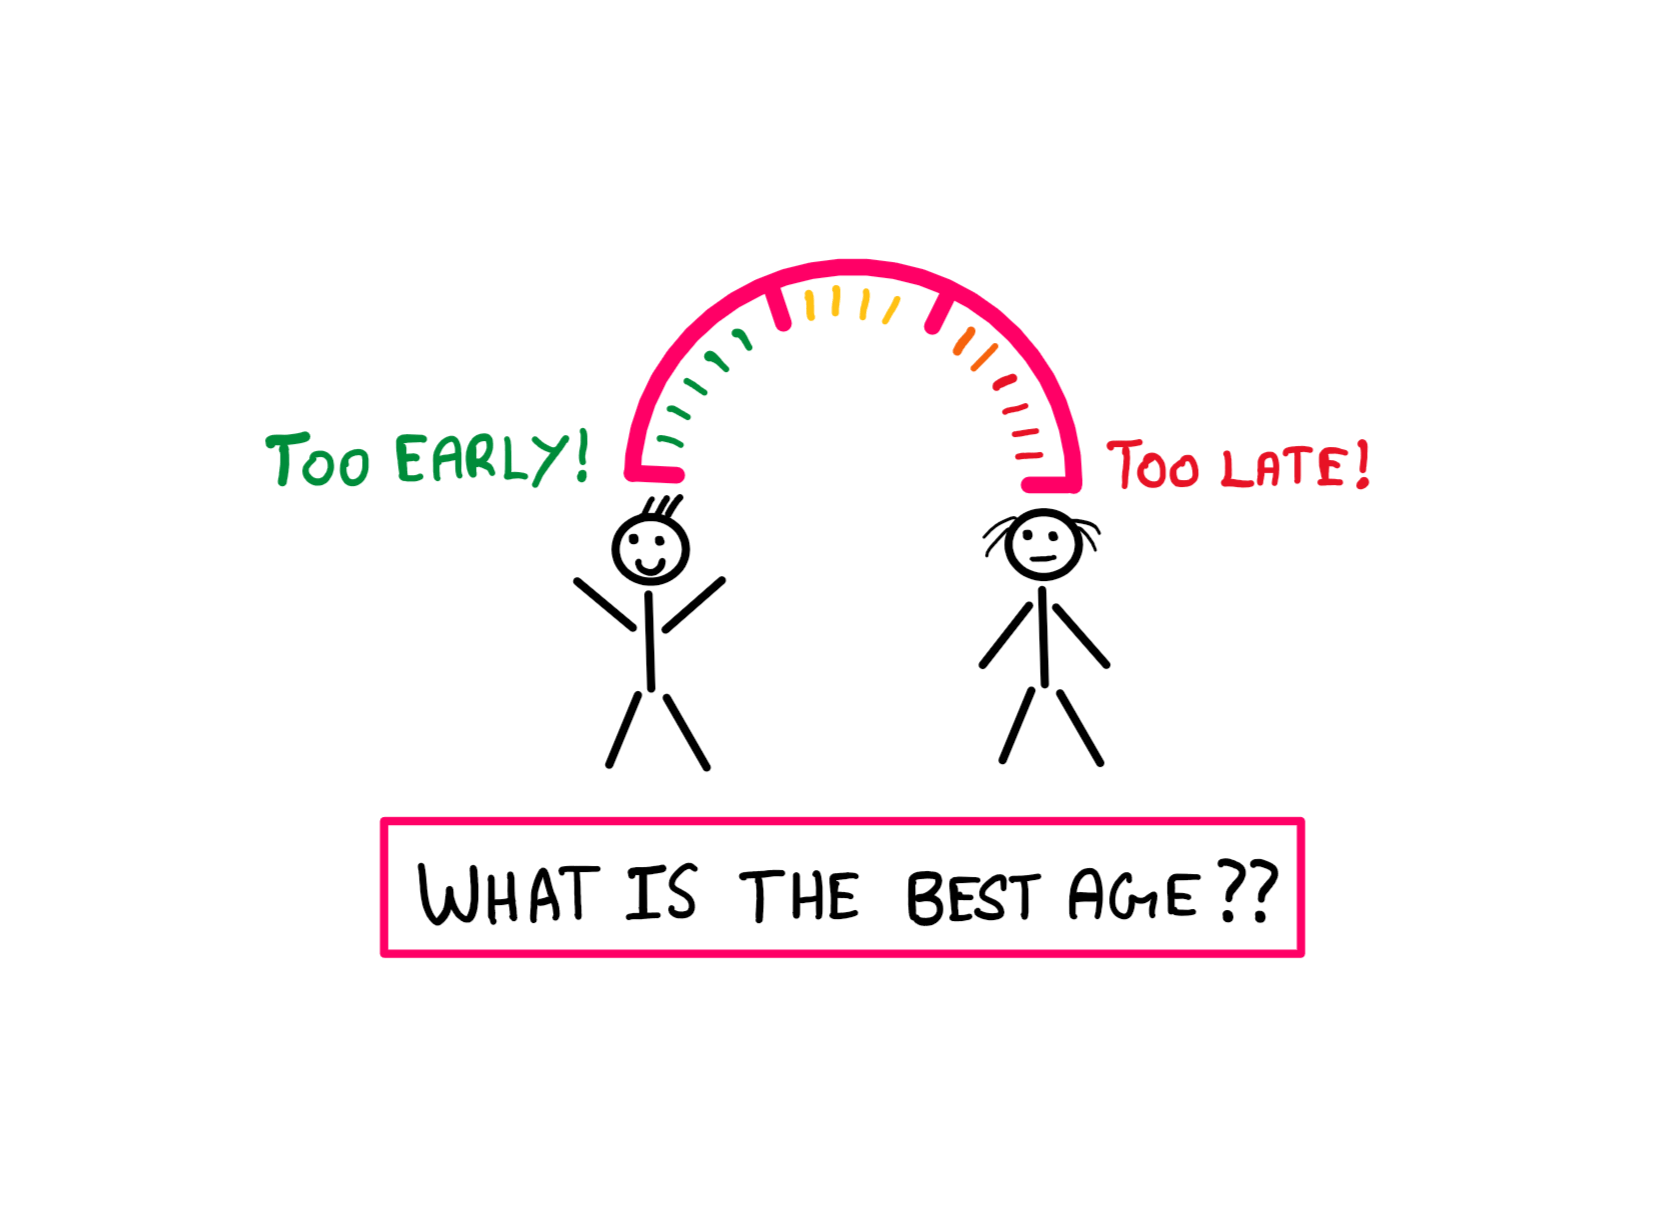 What Is The Best Age To Become An Entrepreneur? - An illustration showing a speedometer style meter with 'too early' on the left extreme and 'too late' on the right extreme. A young stick figure is beneath the left extreme and an old stick figure is below the right extreme.